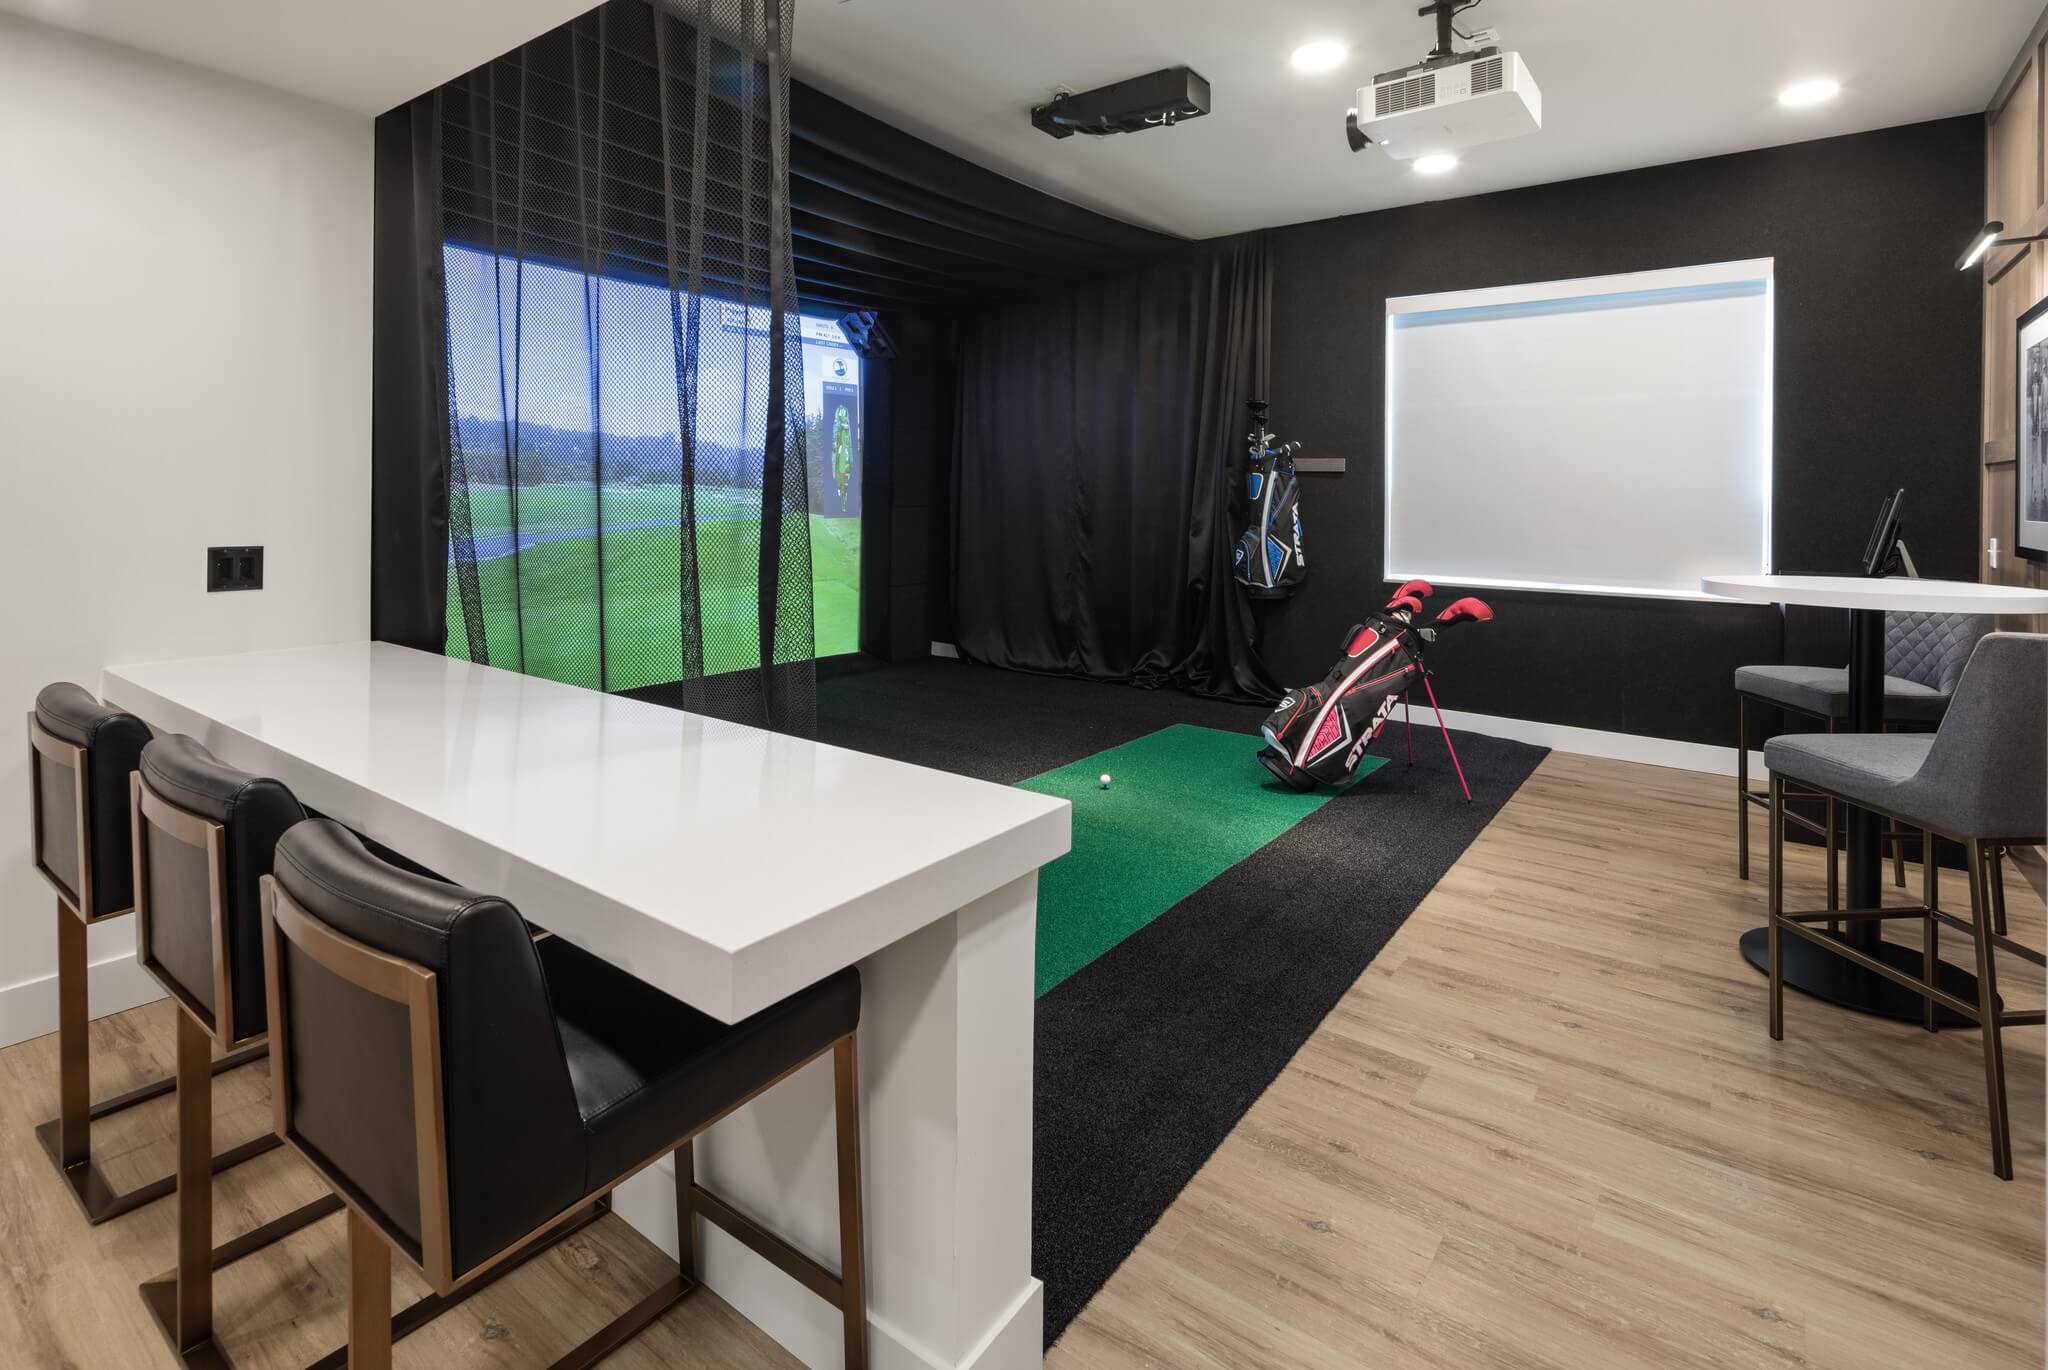 Aster at Riverdale Station sports simulator room with golf clubs and countertop with seating